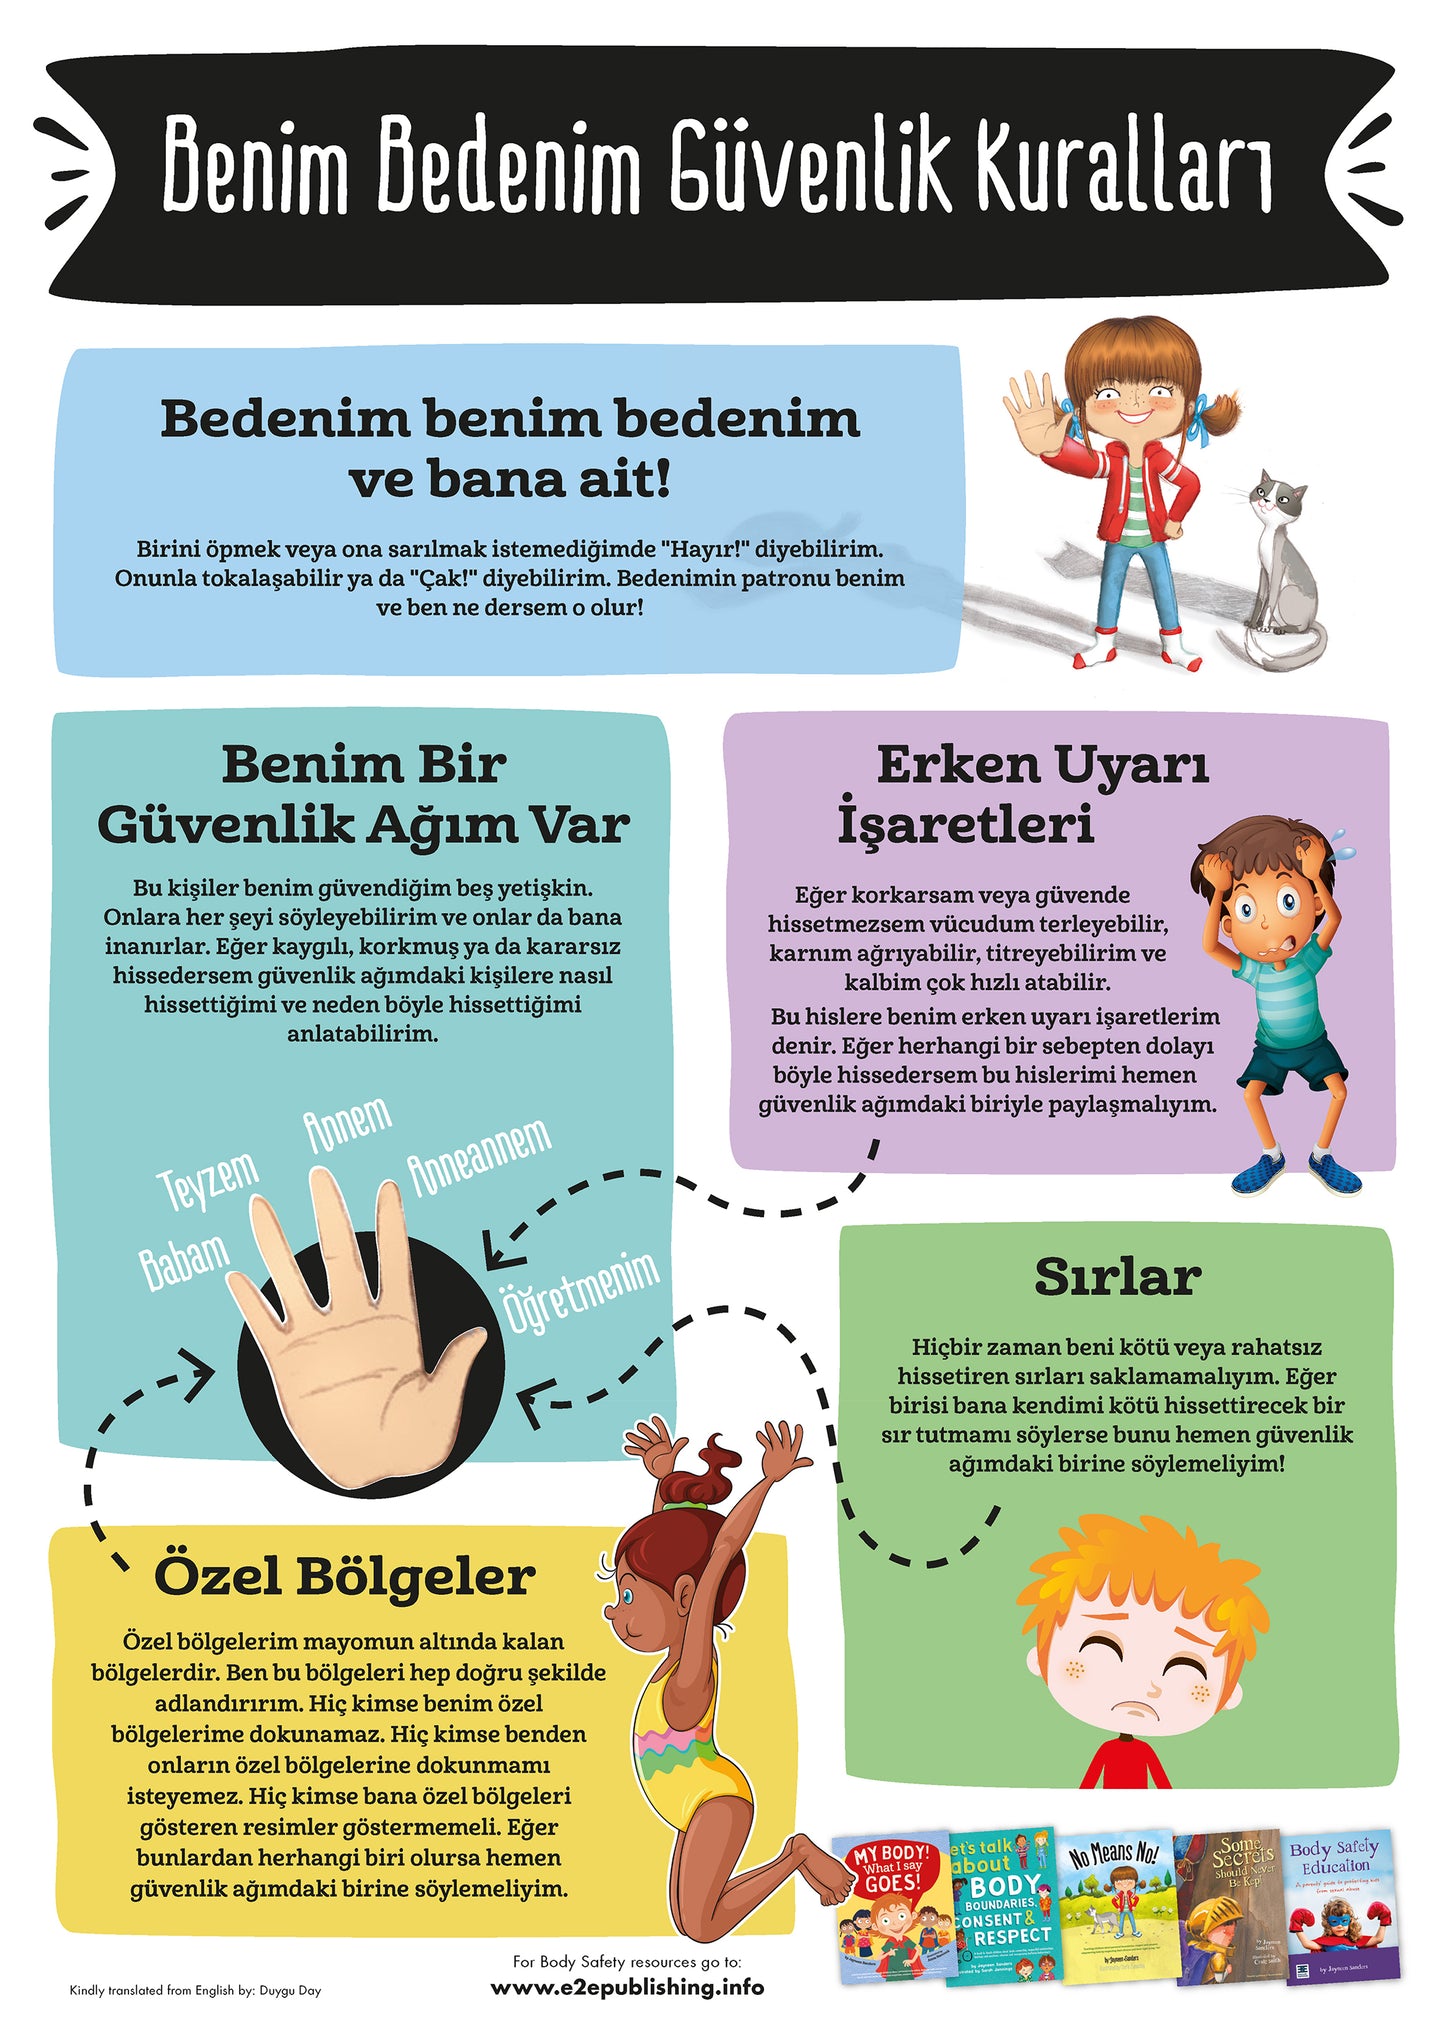 Body Safety Rules poster for children, written in Turkish